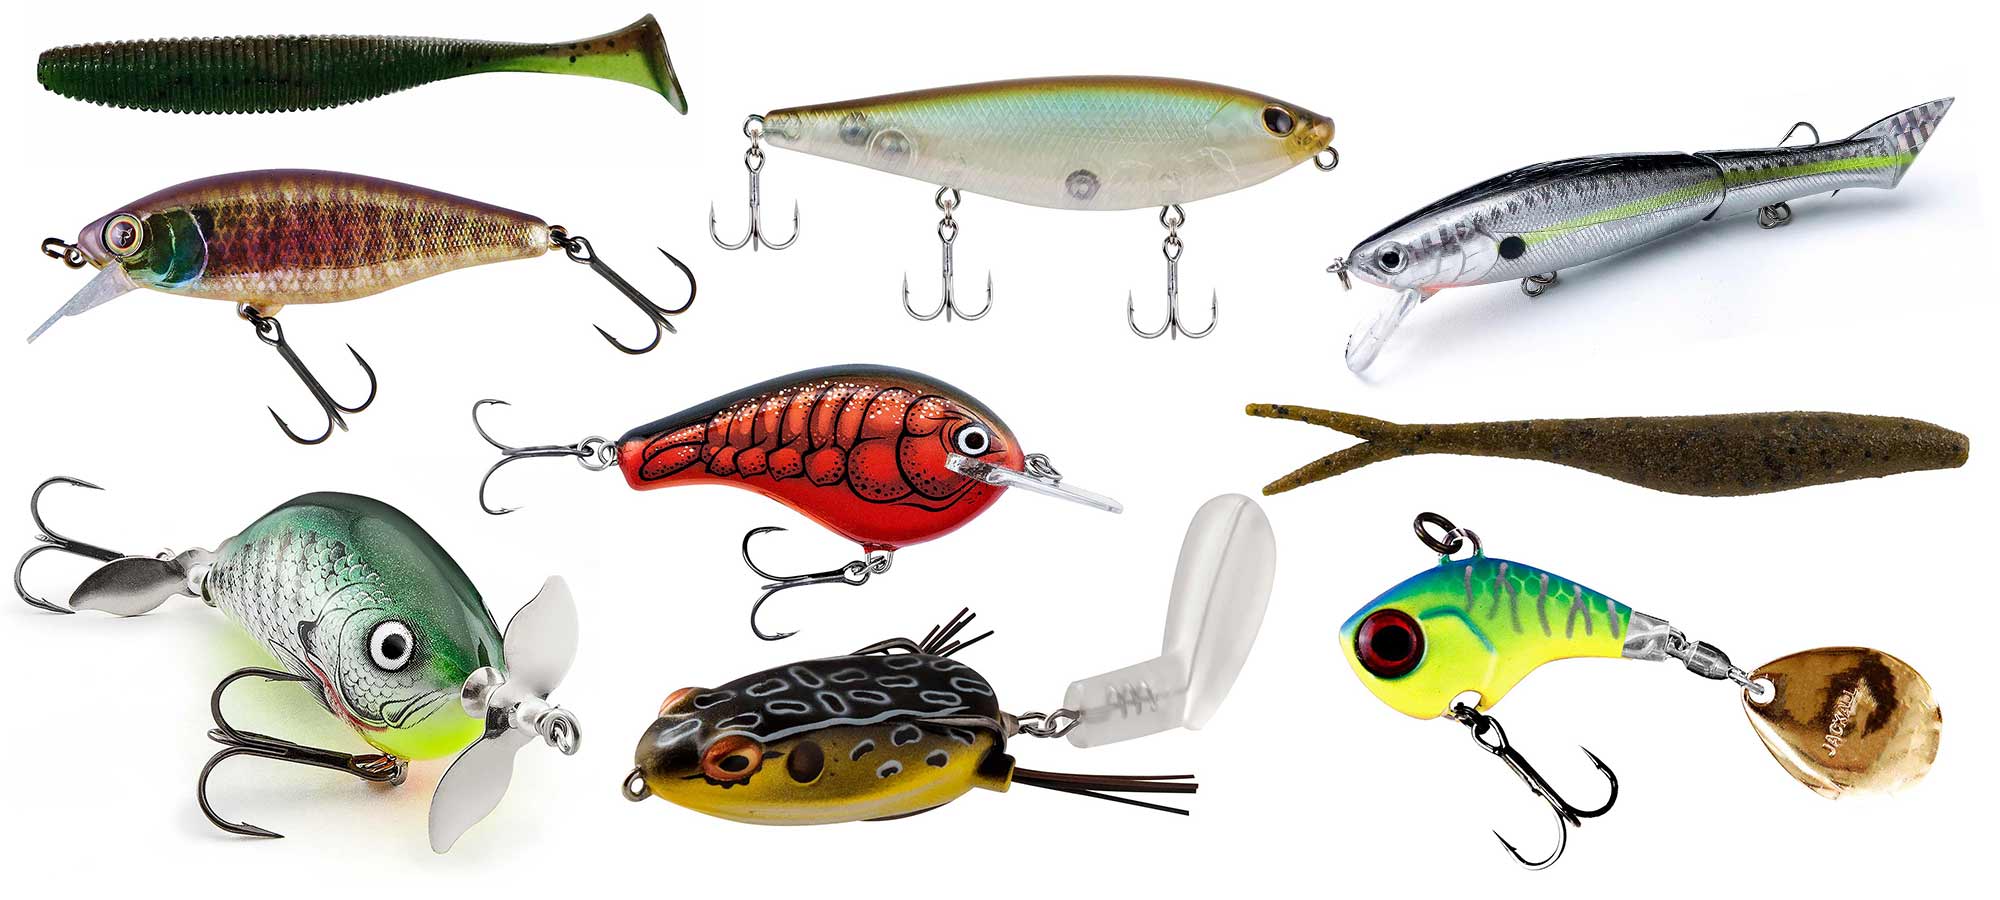 Smartonly 233Pcs Fishing Lures Baits Tackle Including Crankbaits Plastic Worms Topwater Lures for Trout Bass Salmon Spinnerbaits Jigs